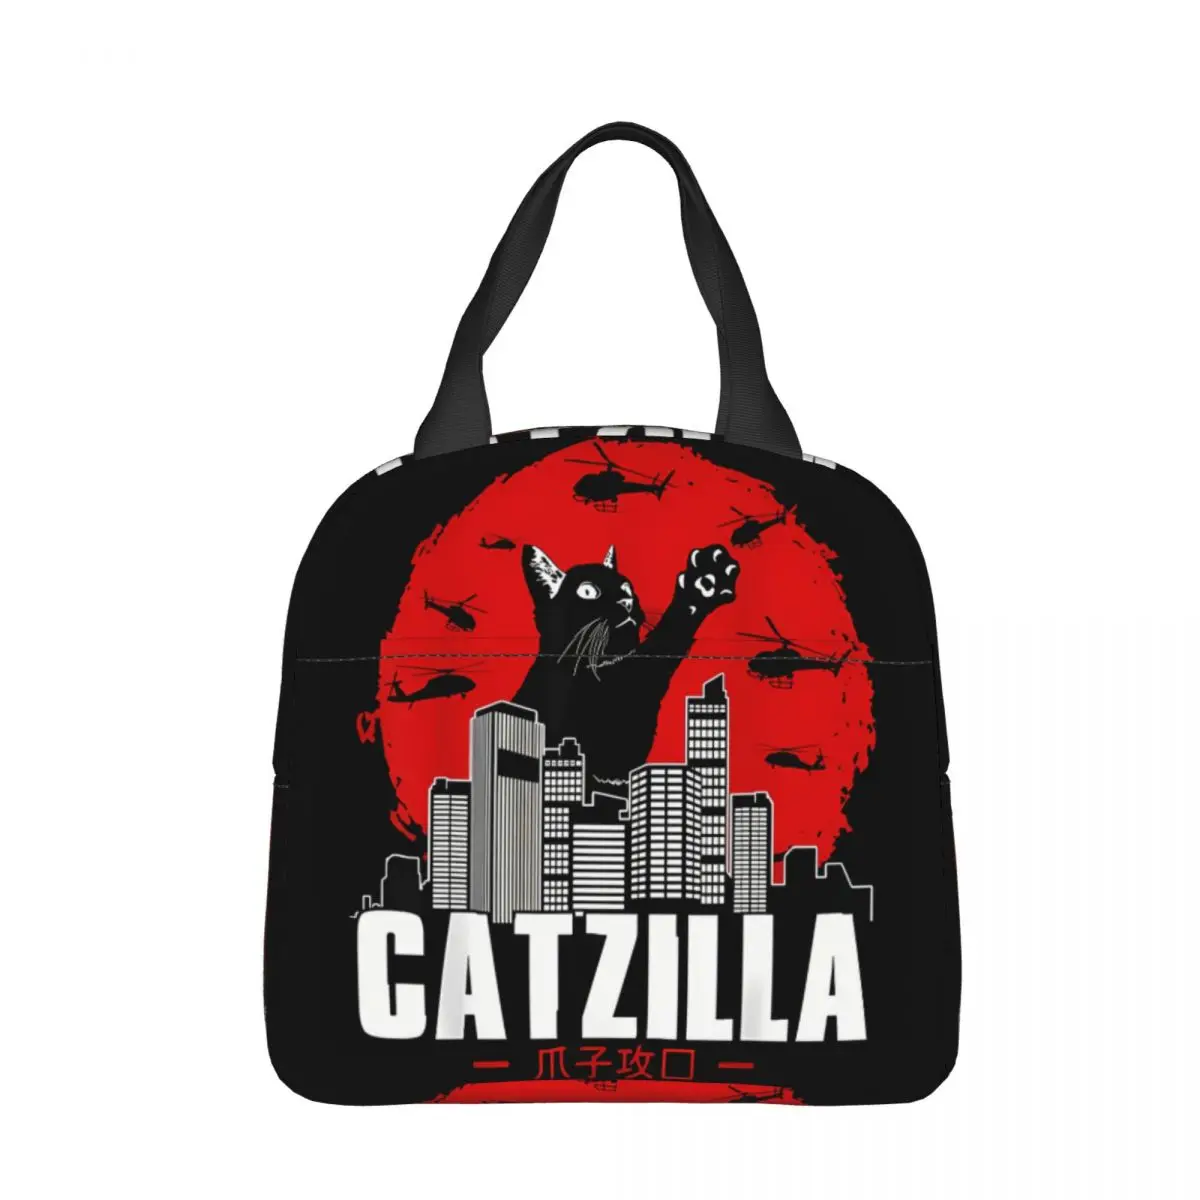 

Just Meow Meow Me Pattern Cooler Lunch Box Catzilla Monsters Kitten Mountaineering Thermal Insulation Portable Food Bag